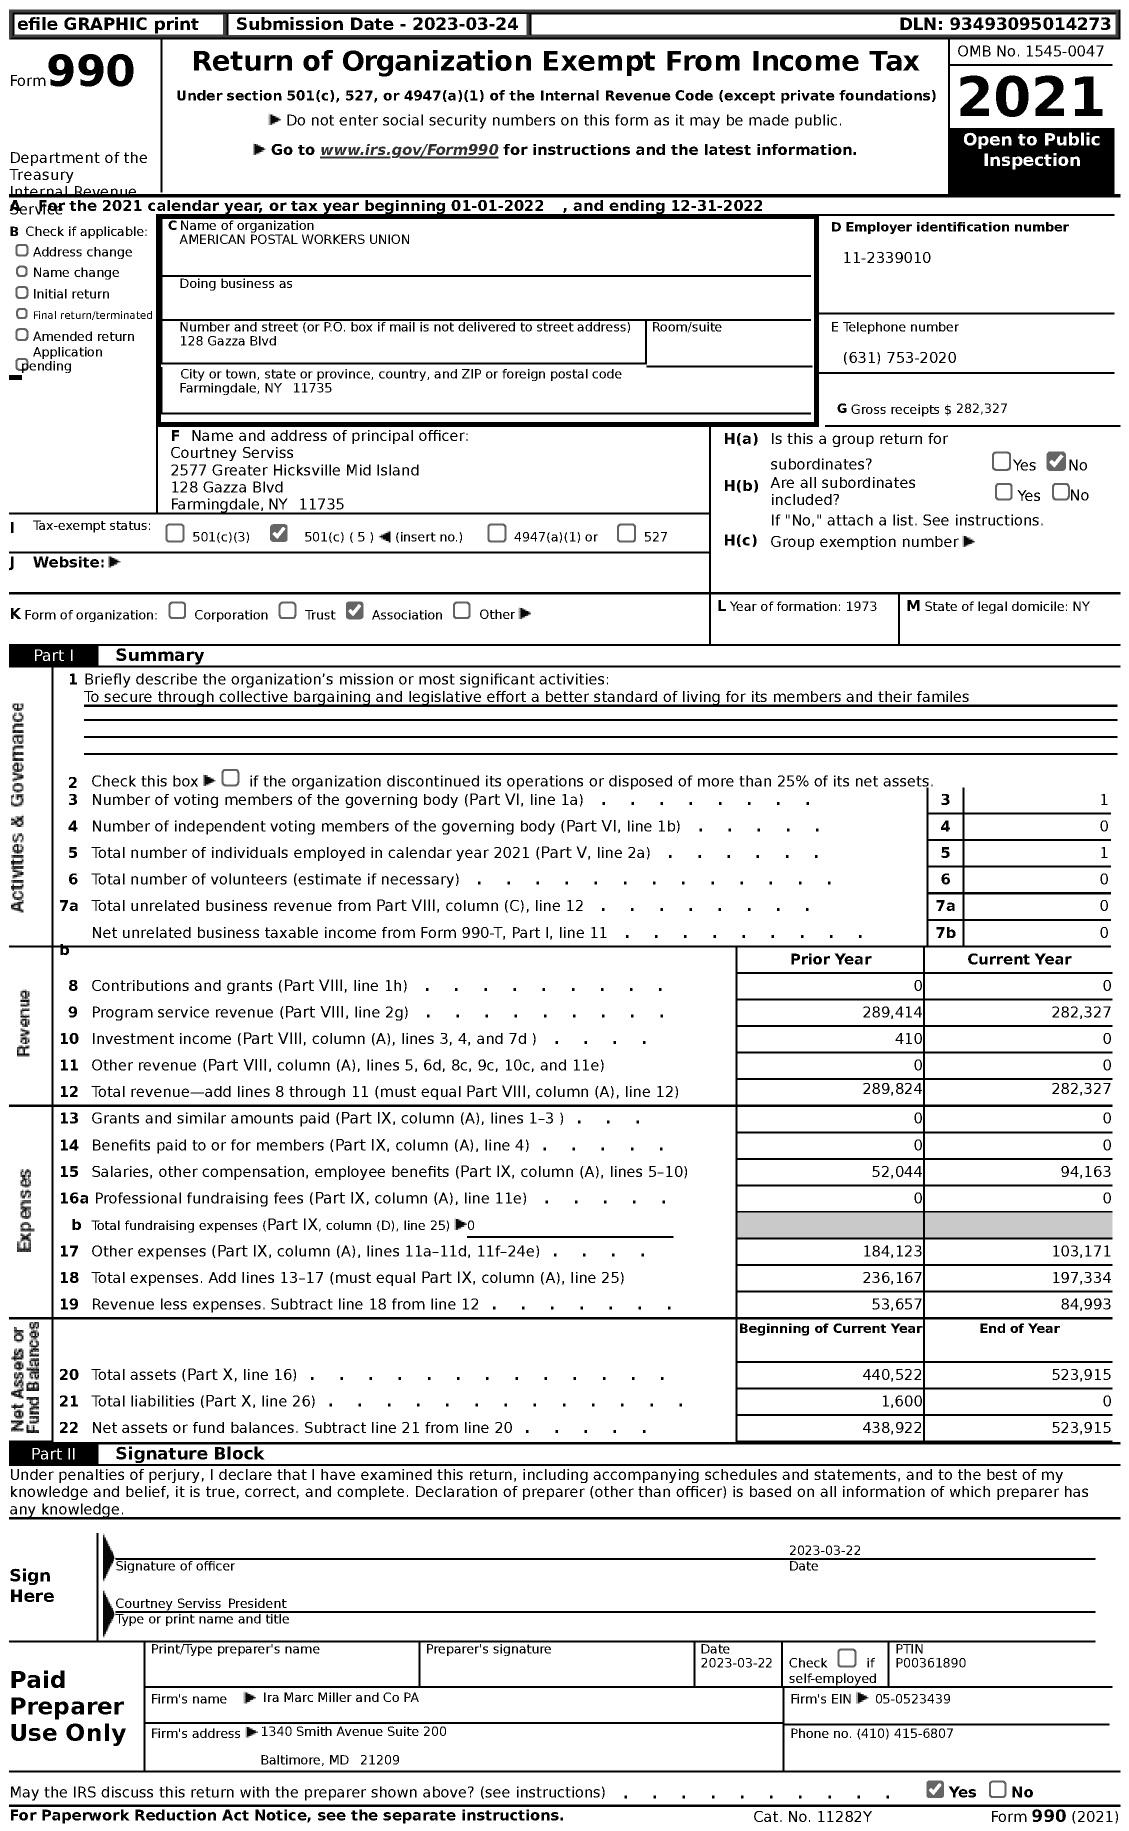 Image of first page of 2022 Form 990 for American Postal Workers Union 2577